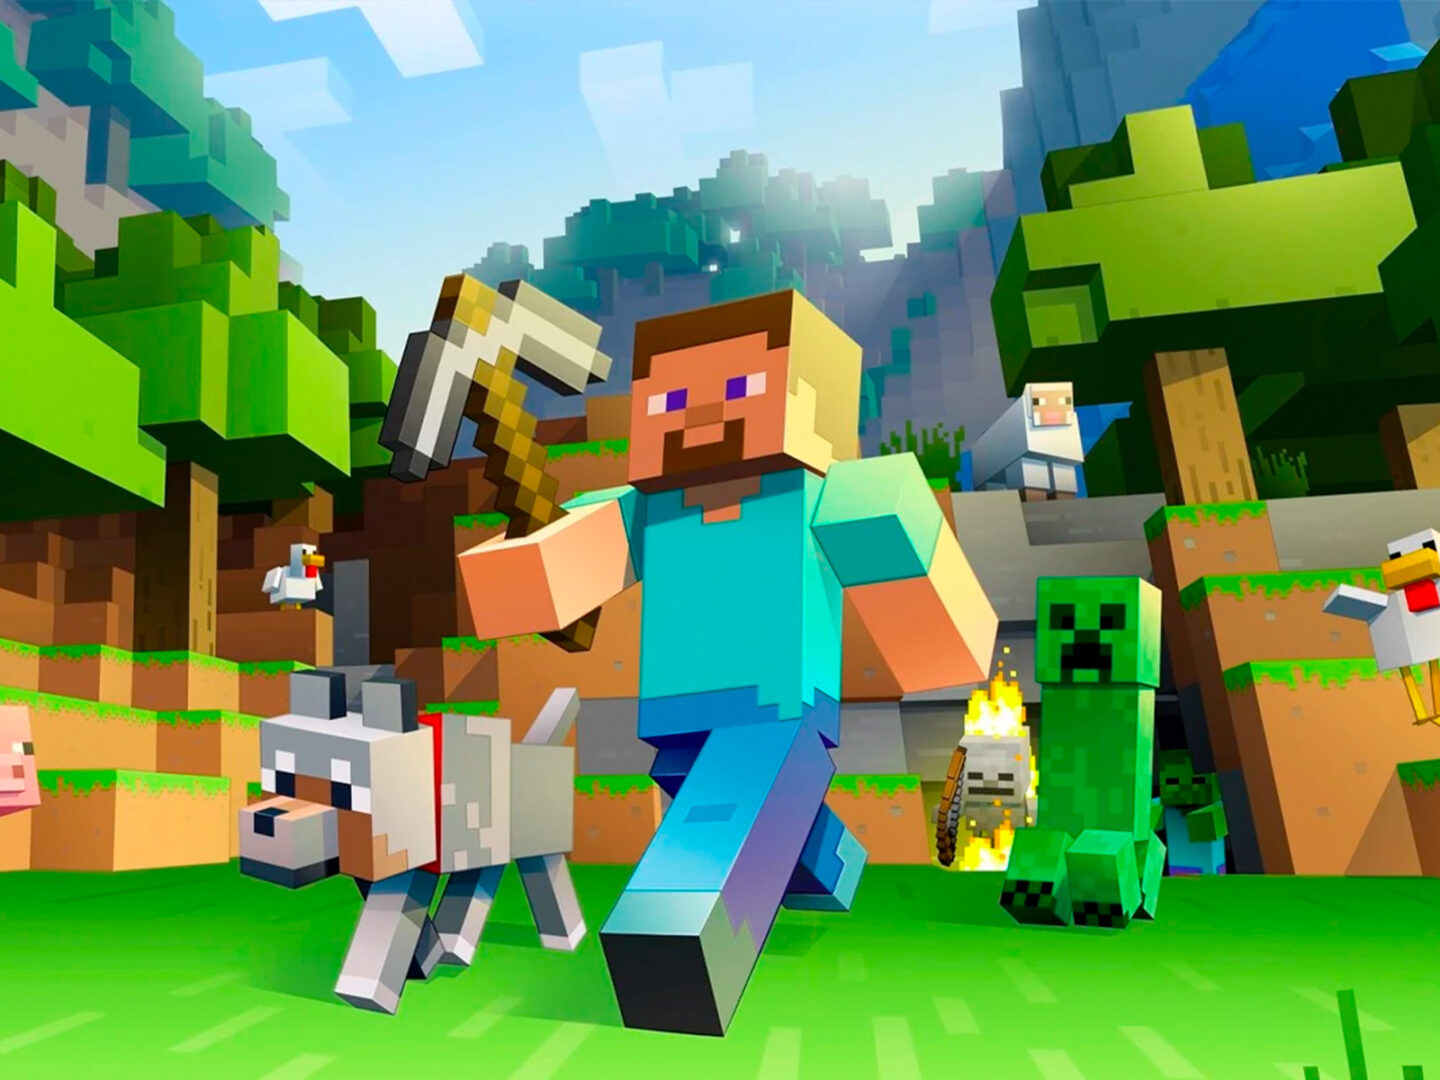 Minecraft is the world’s best-selling videogame